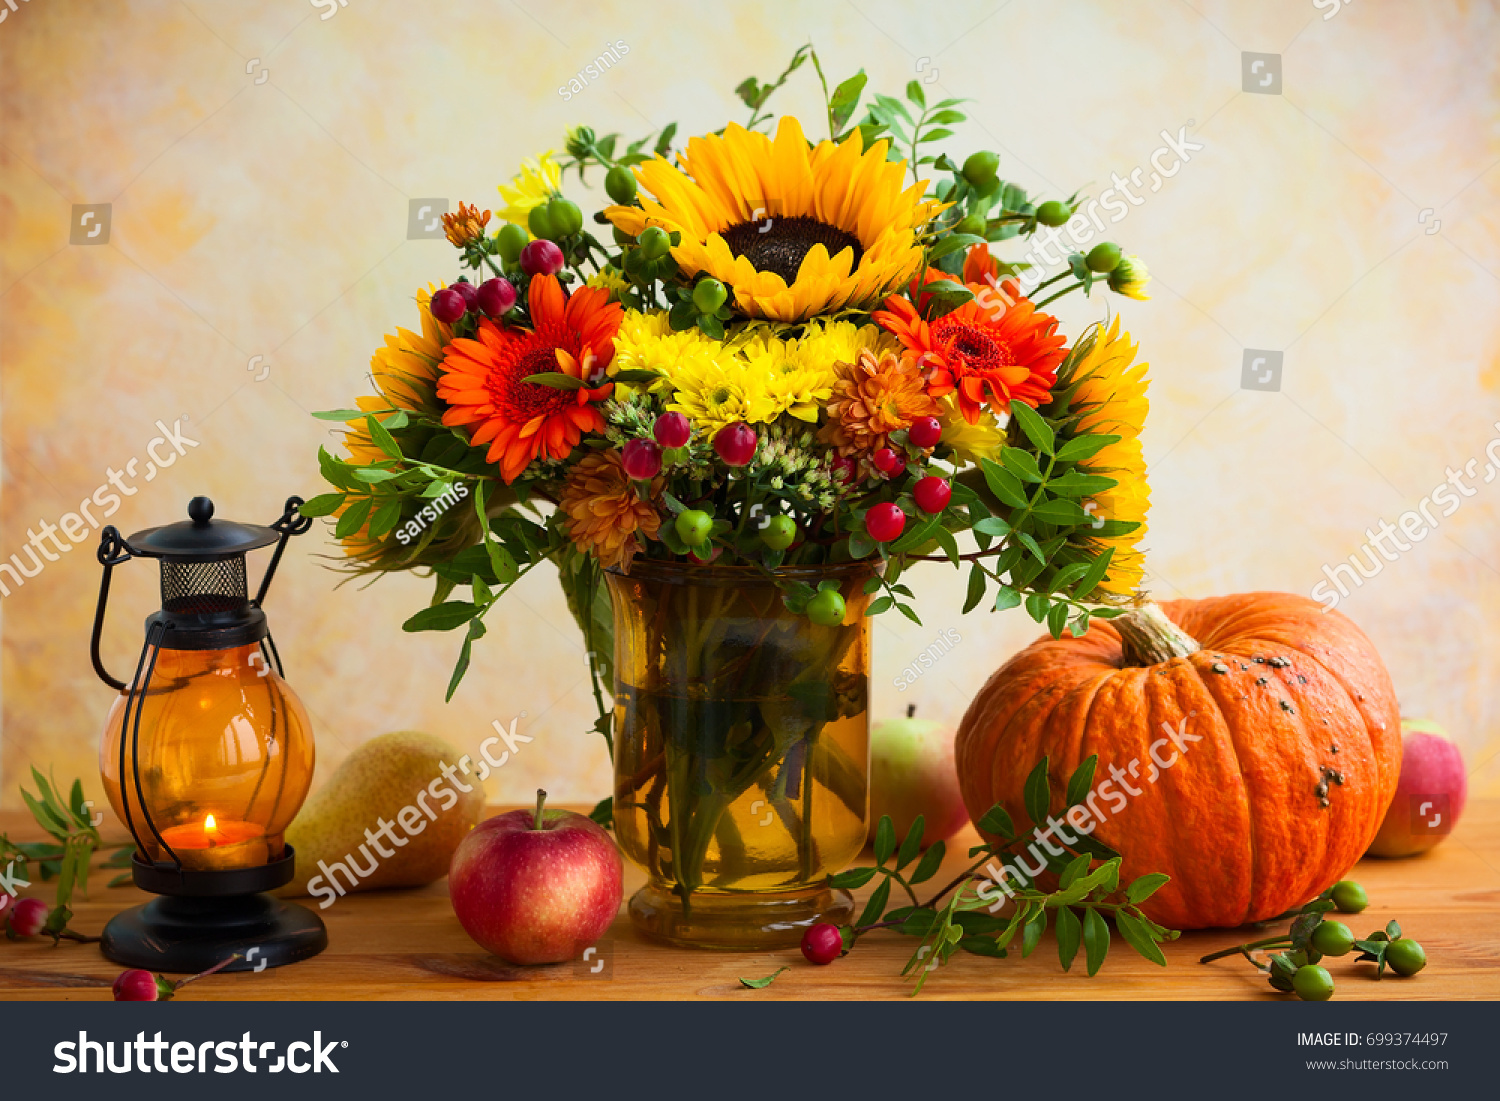 Autumn still life with flowers, pumpkin and fruits #699374497